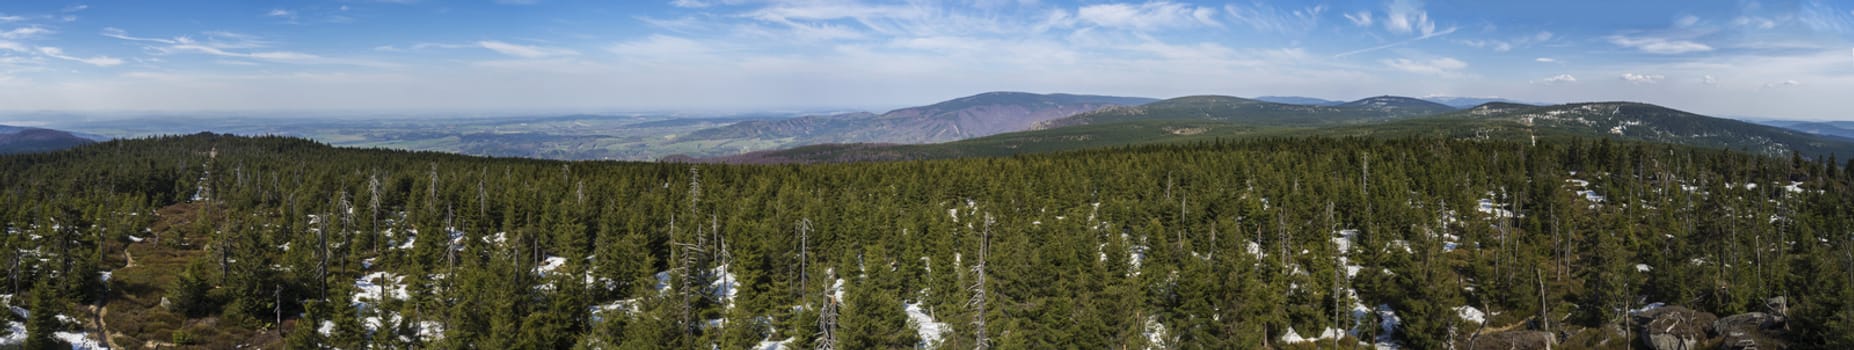 wide panoramic landscape of Jizera Mountains jizerske hory, view from peak of holubnik mountain with lush green spruce forest, trees, hills and fields springtime with snow remains, blue sky background.